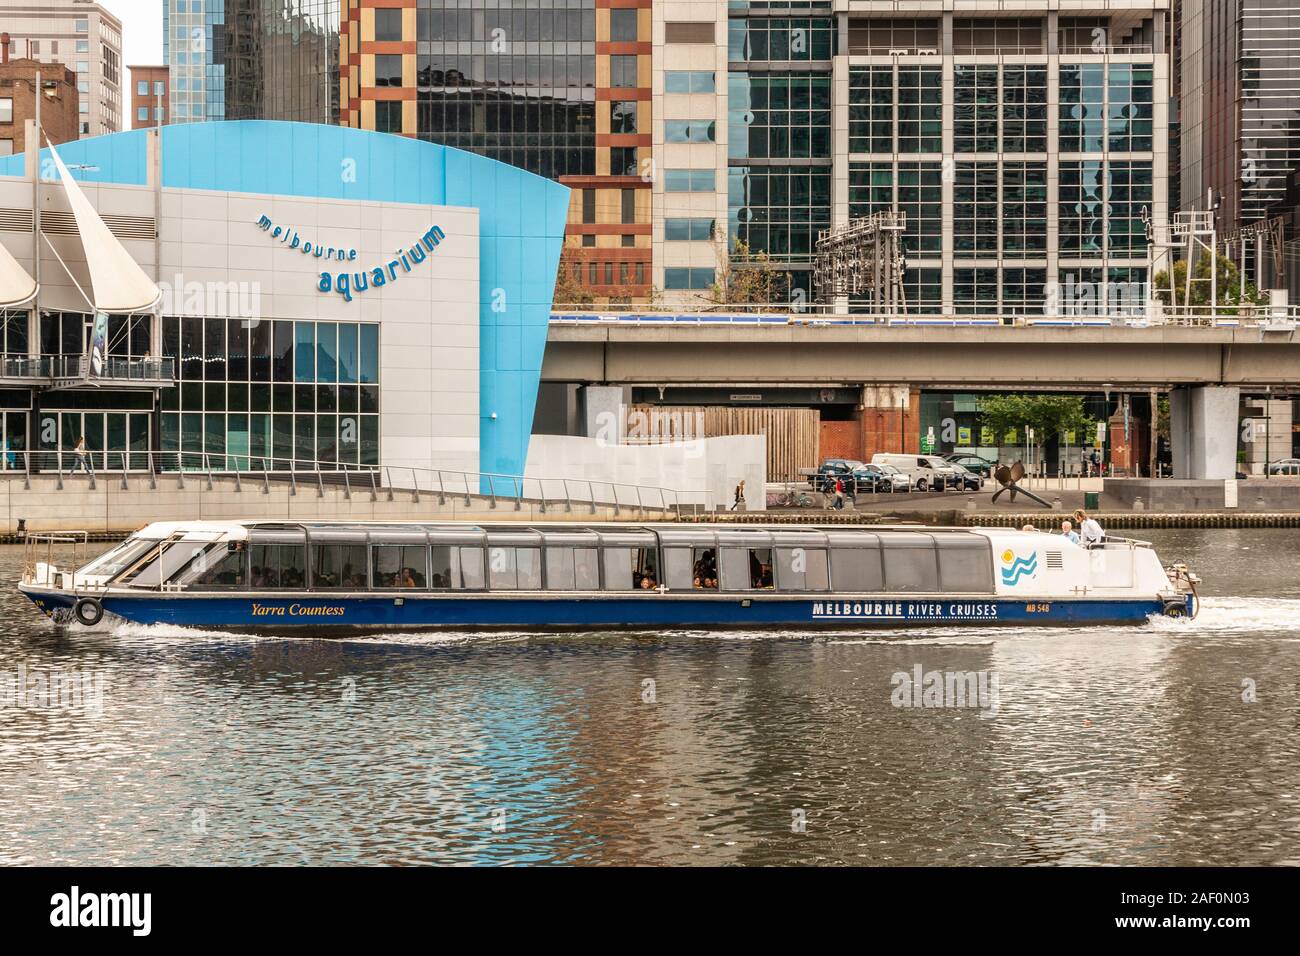 Melbourne, Australia - November 16, 2009: Focus on blue-white Aquarium building front behind yarra river whereon the Yarra Countess river cruise boat Stock Photo